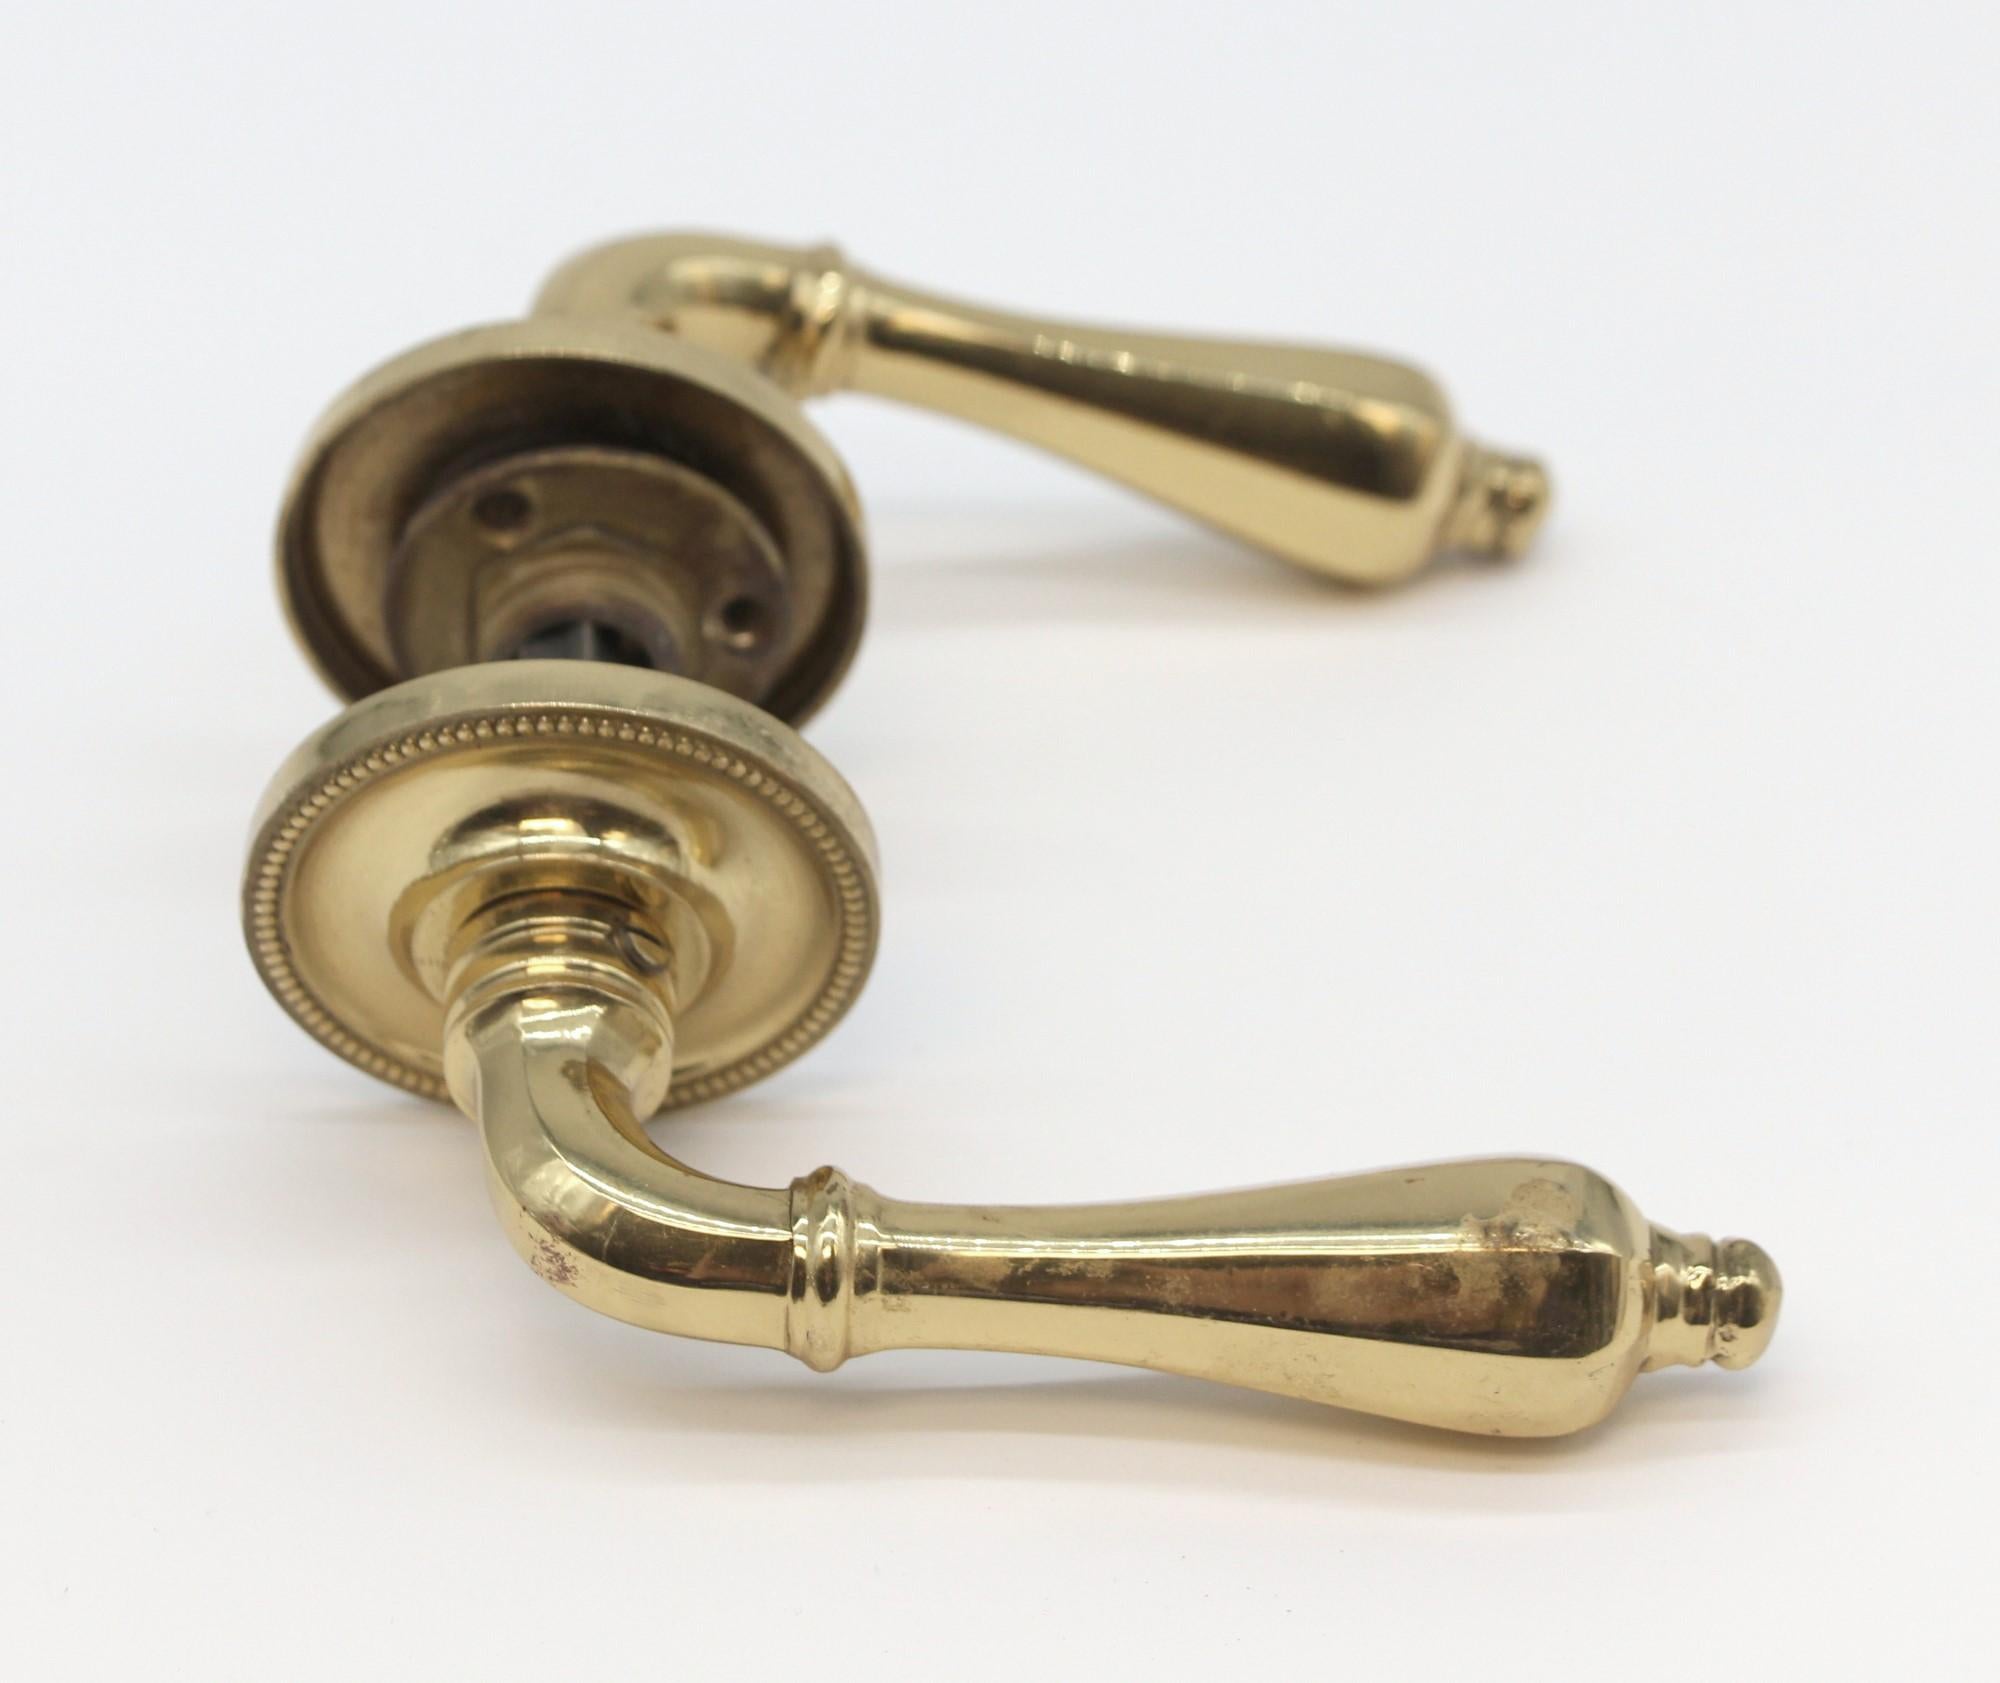 Polished brass vintage passage lever door knob set. Set includes two knobs, a spindle and two rosettes. Priced per set. Small quantity available at time of posting. Please inquire. Please note, this item is located in our Scranton, PA location.